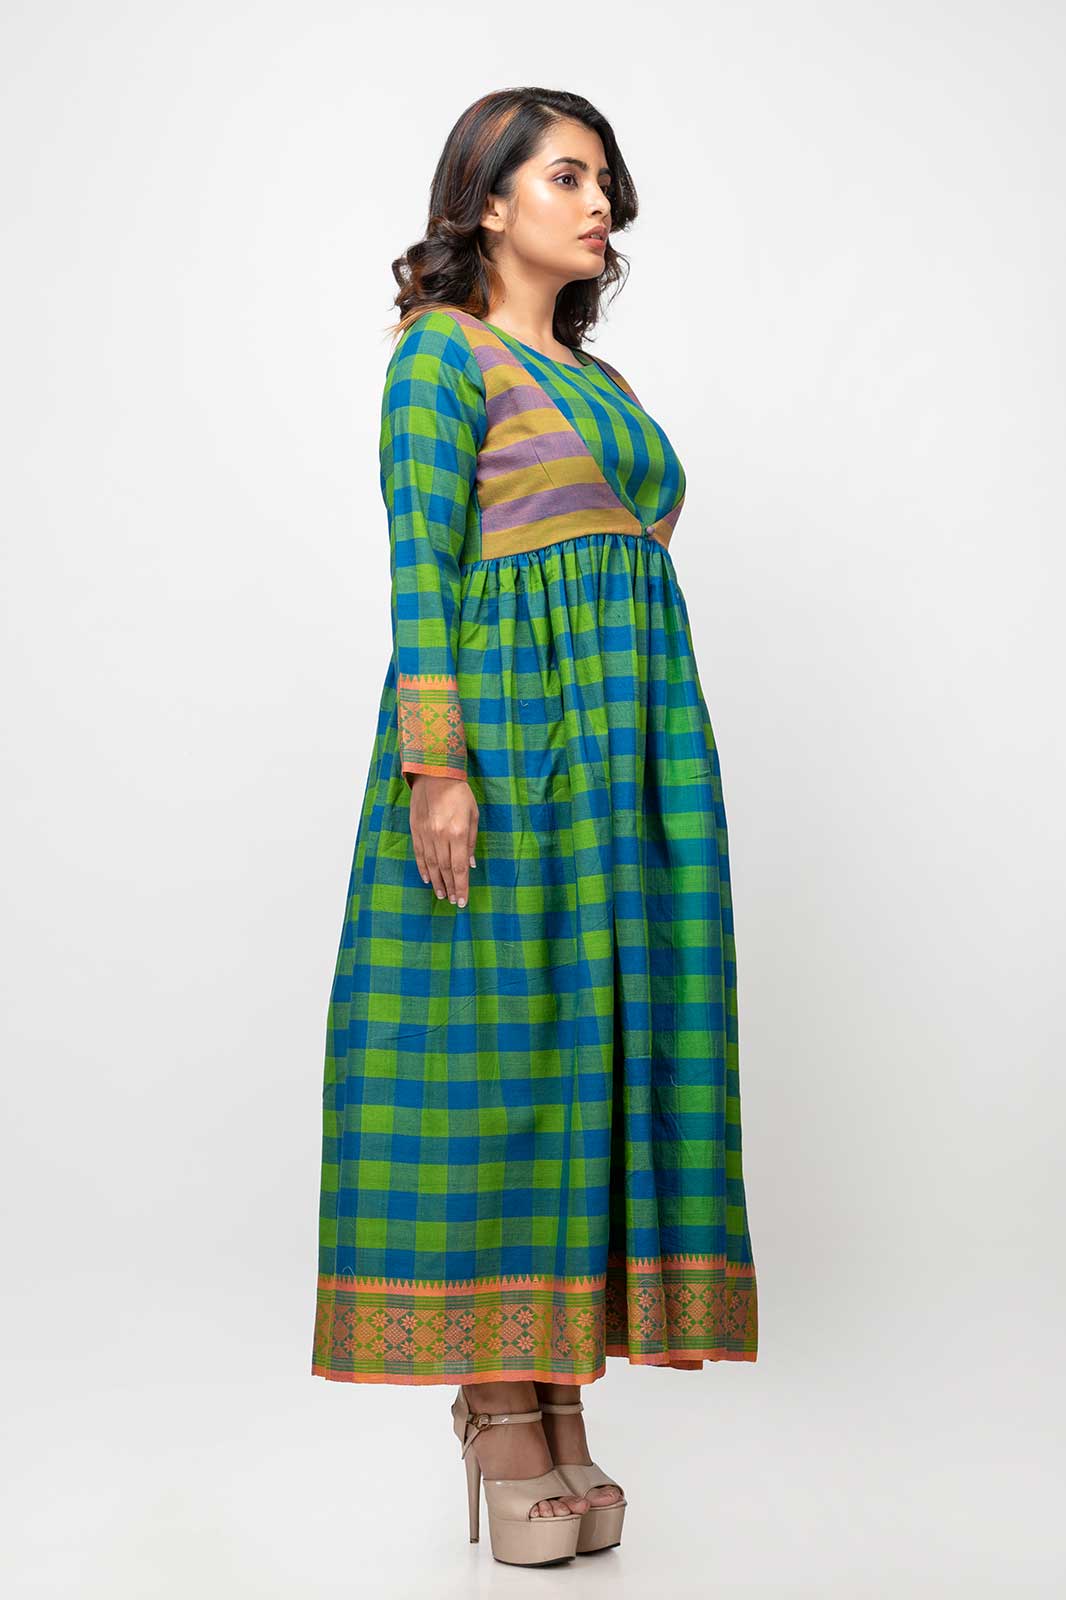 ladies cotton clothing , organic cotton handmade dress, full length cotton a line dress, long women dresses, women's long sleeve dresses, handmade cotton dress, handwoven cotton dress, handmade cotton linen dress, handwoven printed dresses, knee length dresses formal, , knee length dresses plus size, knee length dress casual, ladies cotton clothing, Indian designer clothing brand, sustainable clothing, cotton dress with sleeves, ladies summer dress, handwoven printed dresses, cotton dress readymade, sepia stories, ladies off shoulder dress, sleeveless dress, cotton dress, women cotton dress, designer cotton dress, summer dresses online, latest summer collection, silk linen cotton dress, silk linen dress